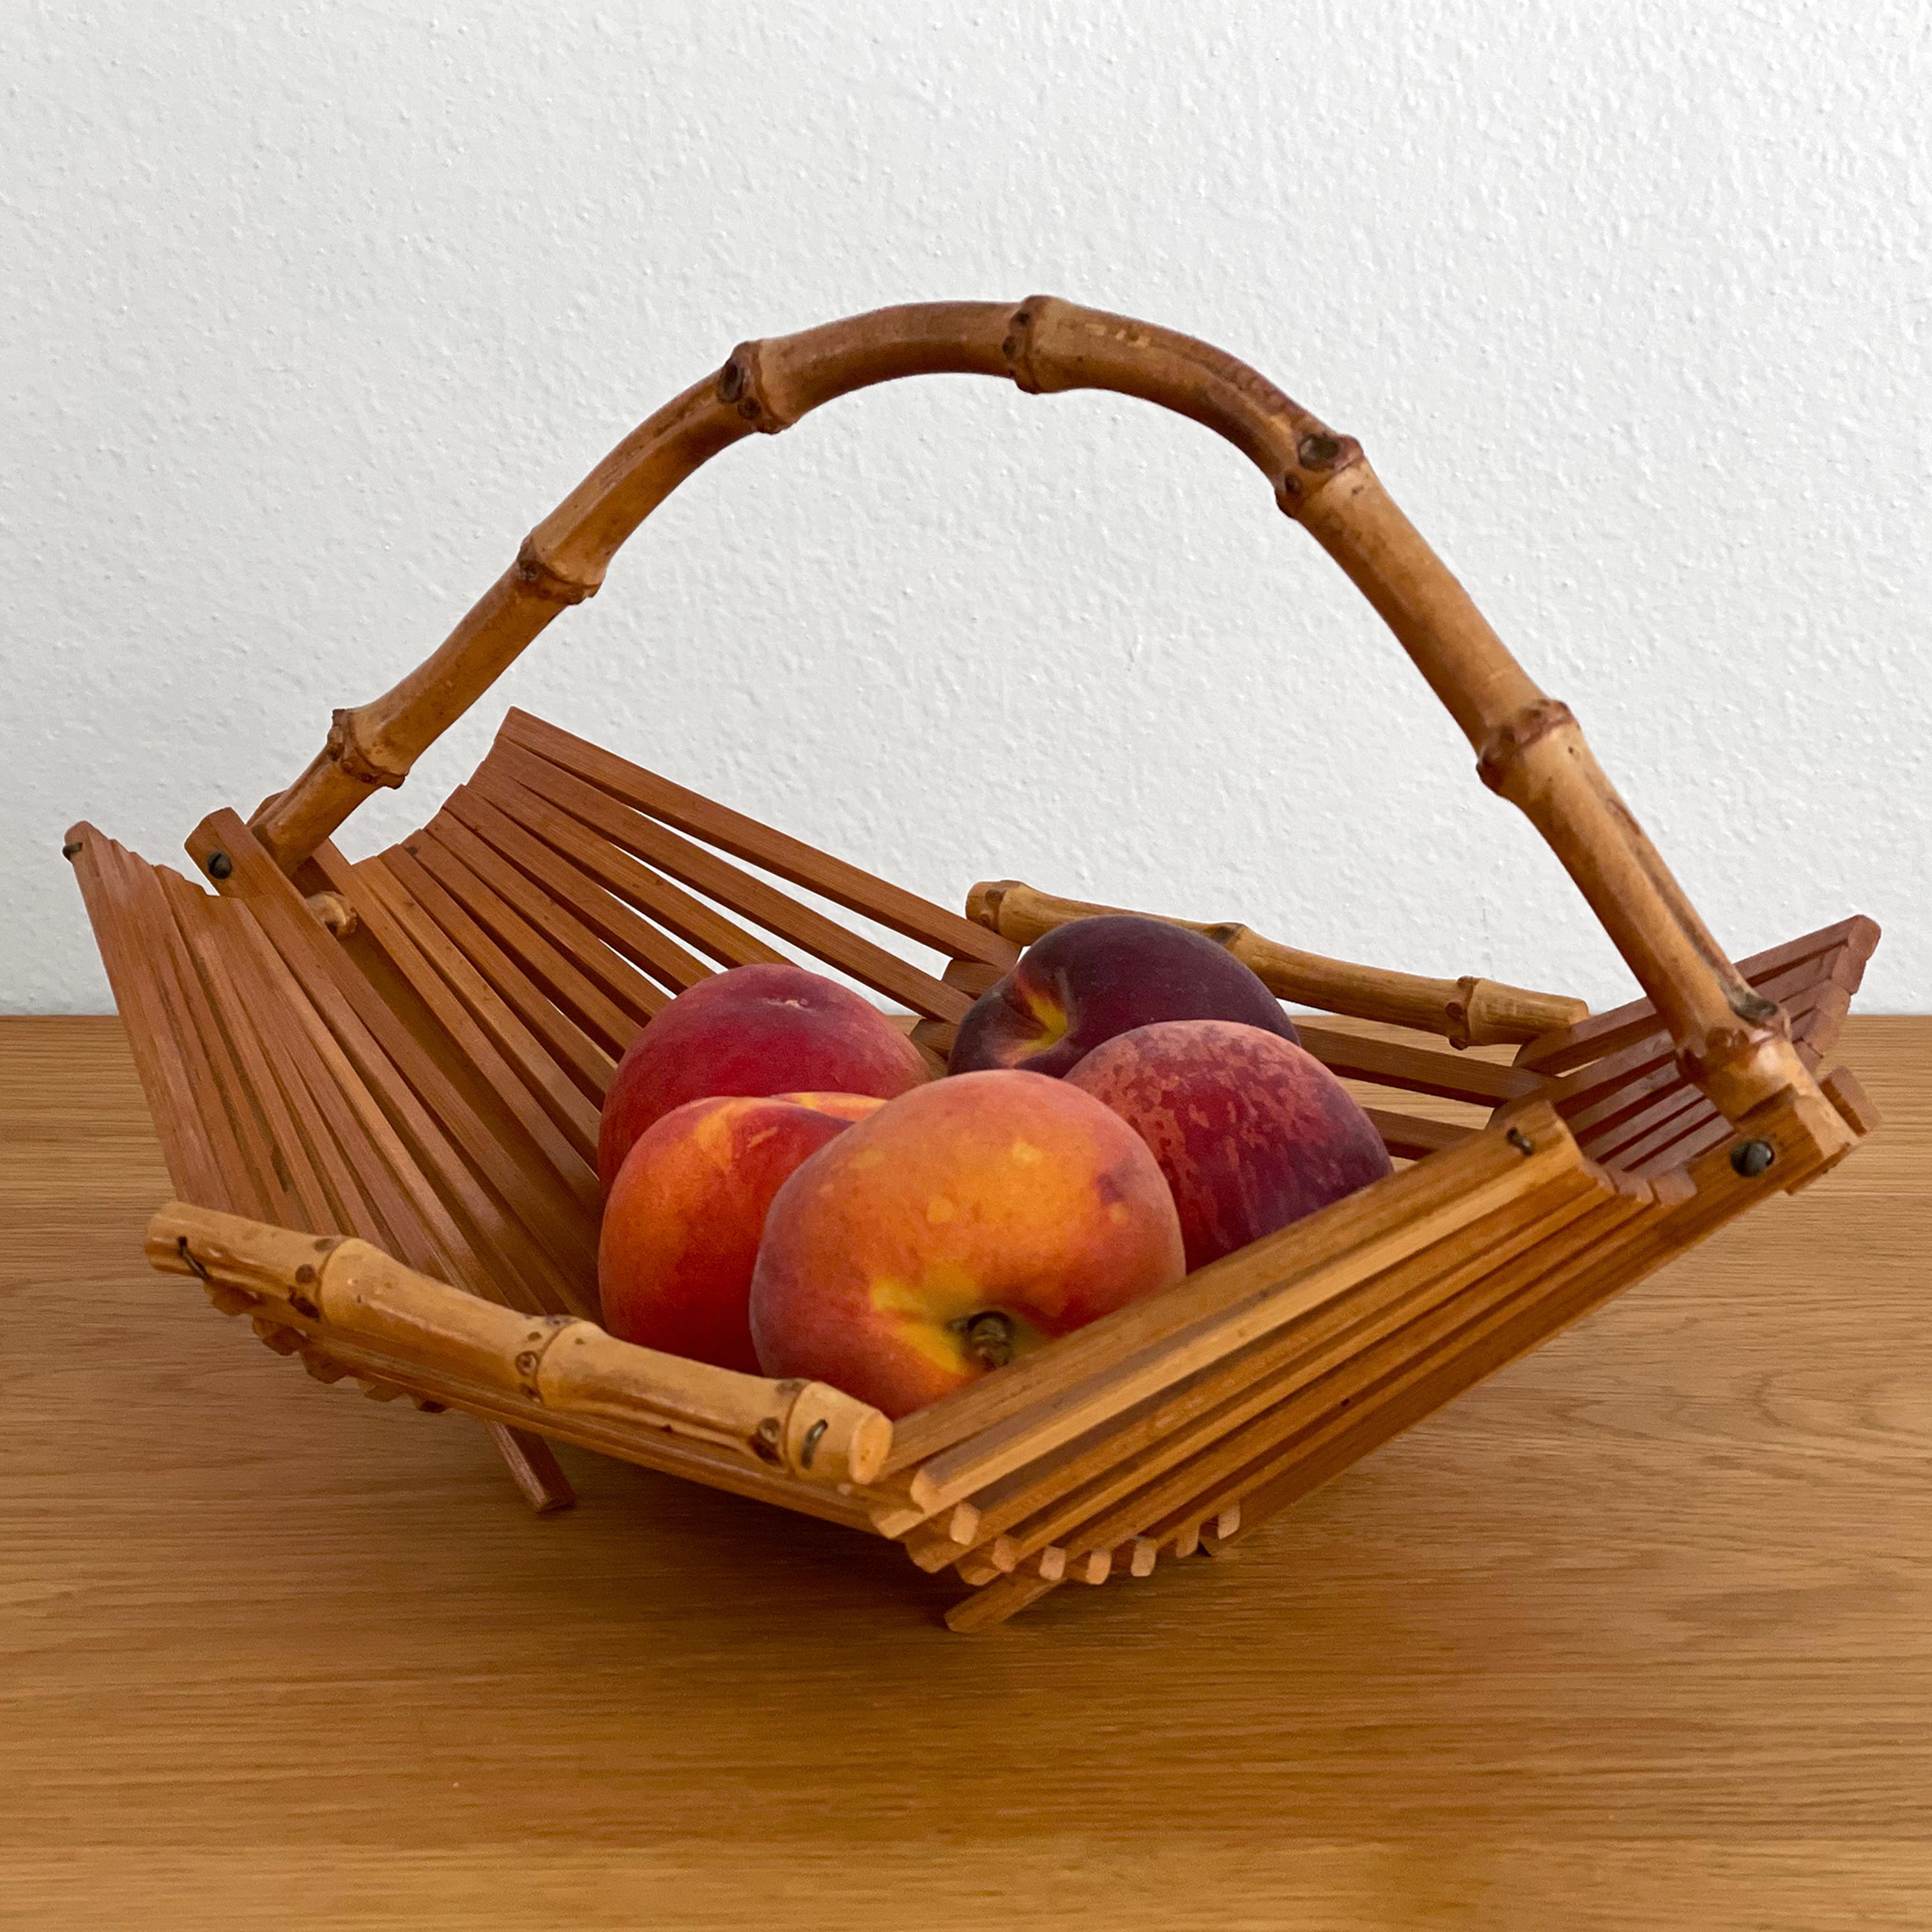 French bamboo fruit basket
France, circa 1950s
Sculptural lines with curved bamboo handle and accents
This artisanal piece will brighten any kitchen counter space
Timeless classic 
Newly reconditioned
Patina from age and use 